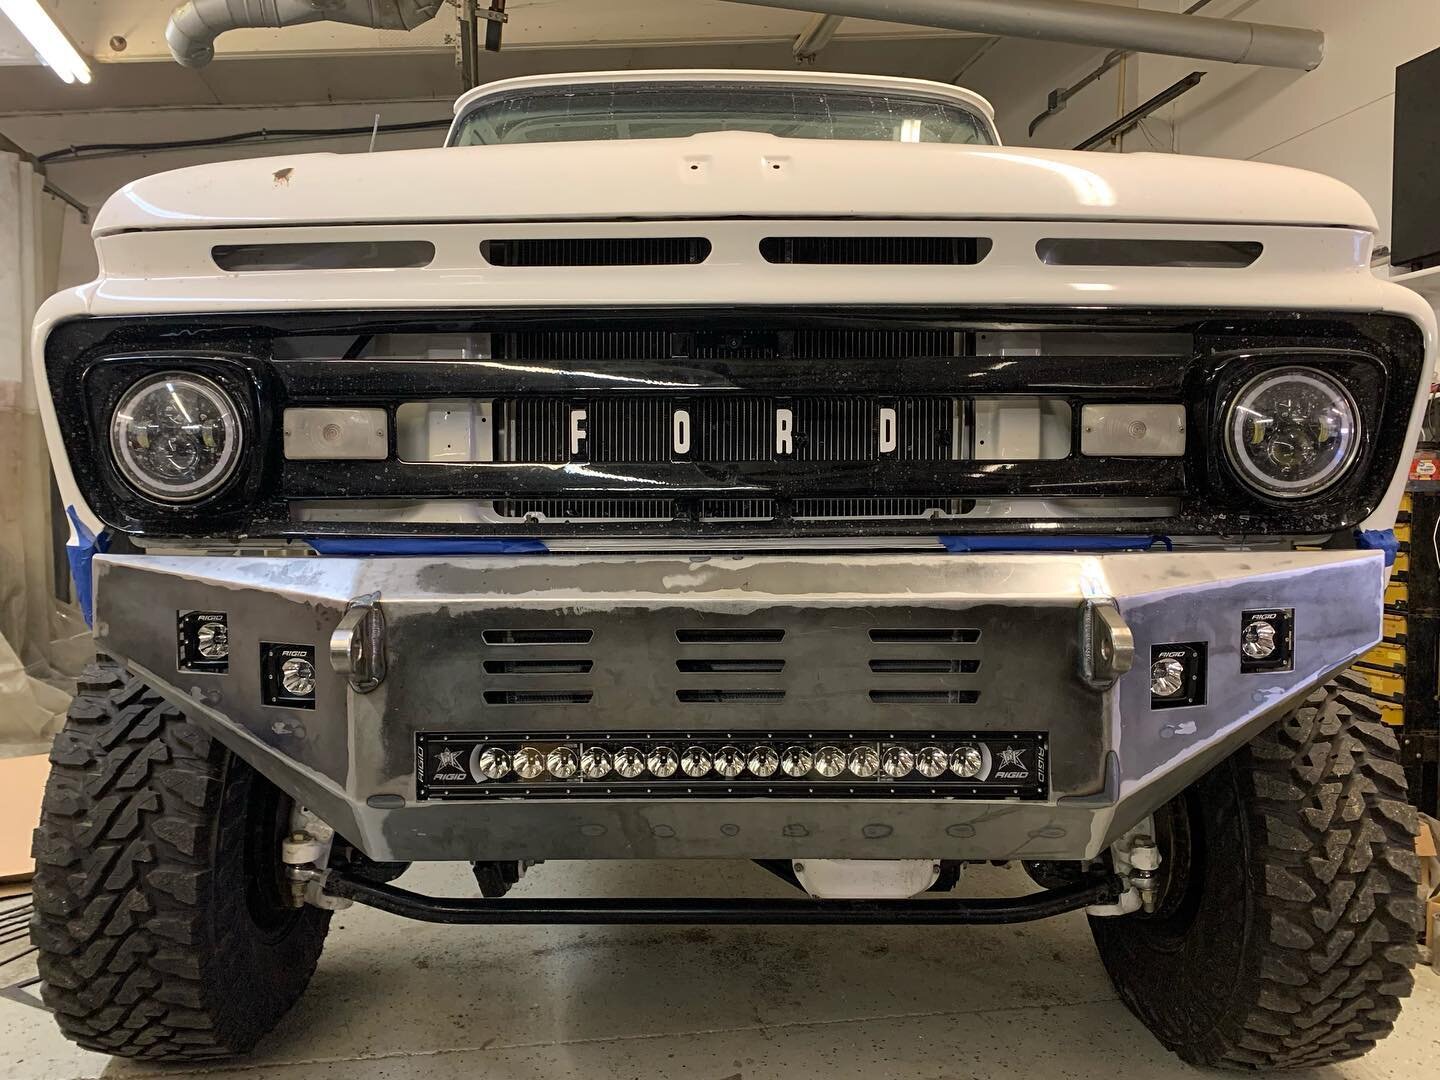 A custom front bumper I just finished up. It&rsquo;s got some @ballisticfab clevis mounts and it&rsquo;s sporting some @rigidindustries pods and light bar. #cncplasma #rigidindustries #ballisticfab #jdsquared #hypertherm #powermax85 #tigweld #migweld